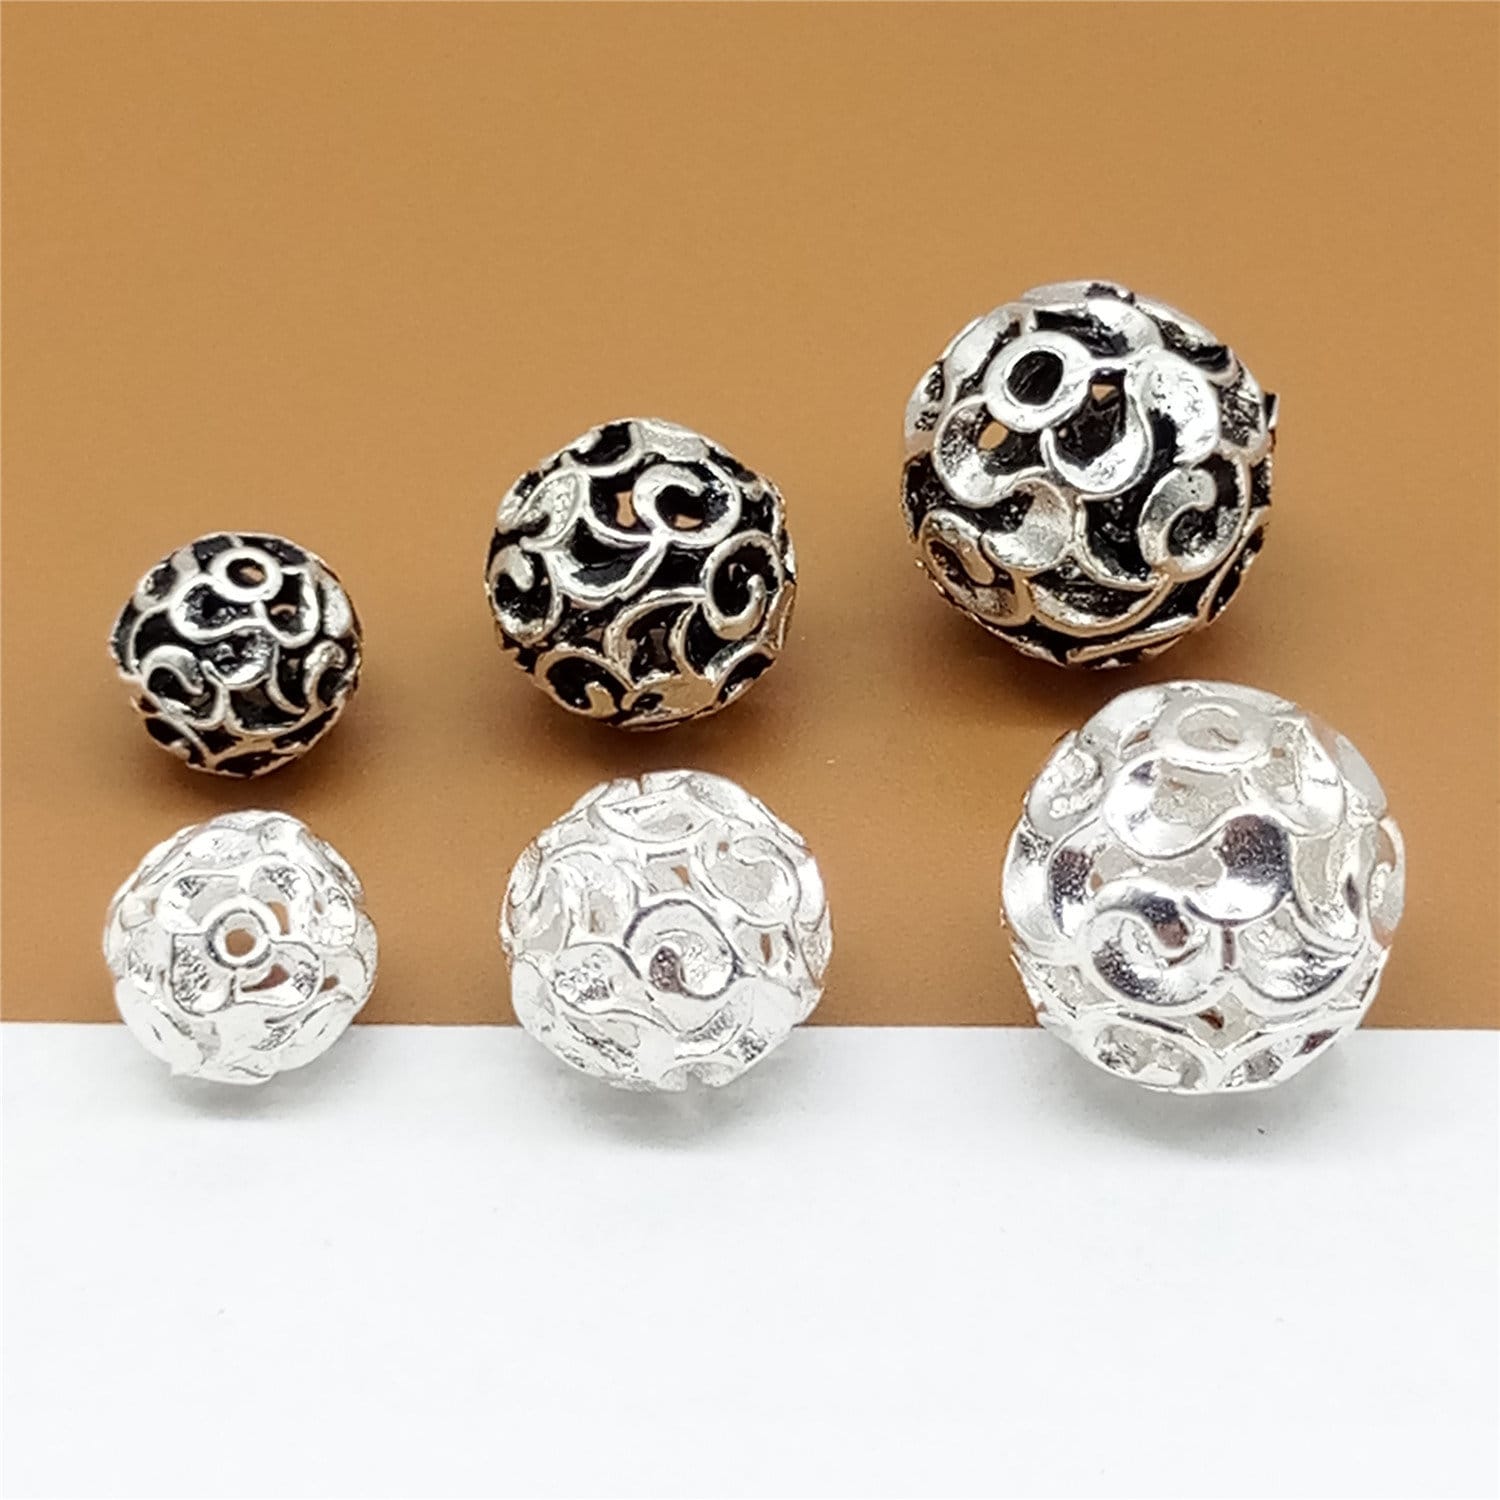 Sterling Silver 925 Round Filigree Beads 12mm hole size 2mm